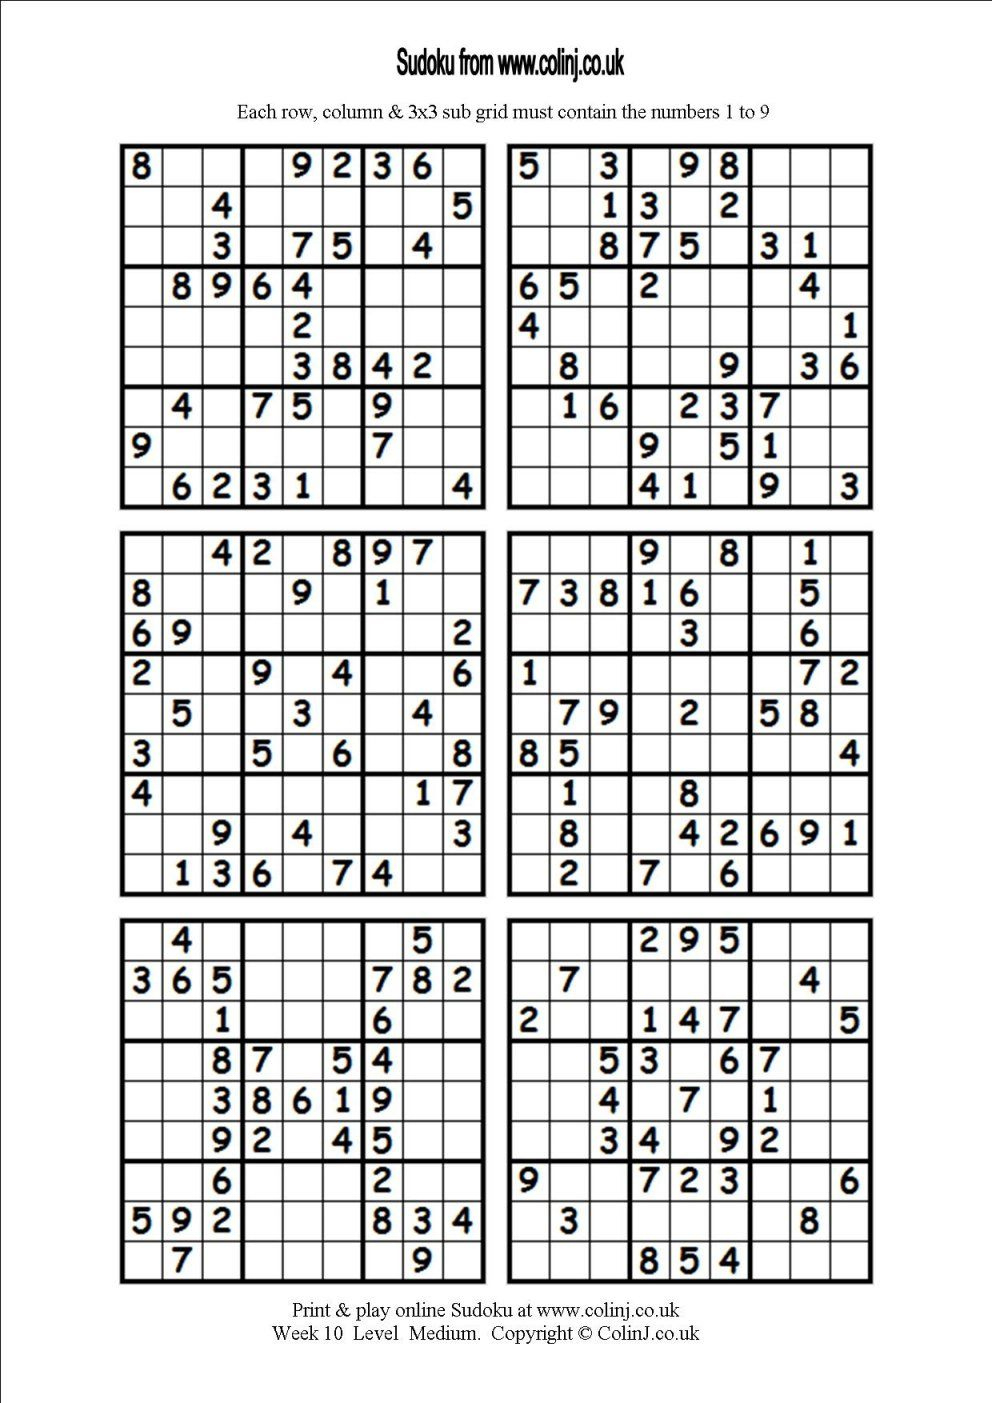 6 Printable Sudoku Puzzles Per Page within Download Printable Sudoku Puzzles Free